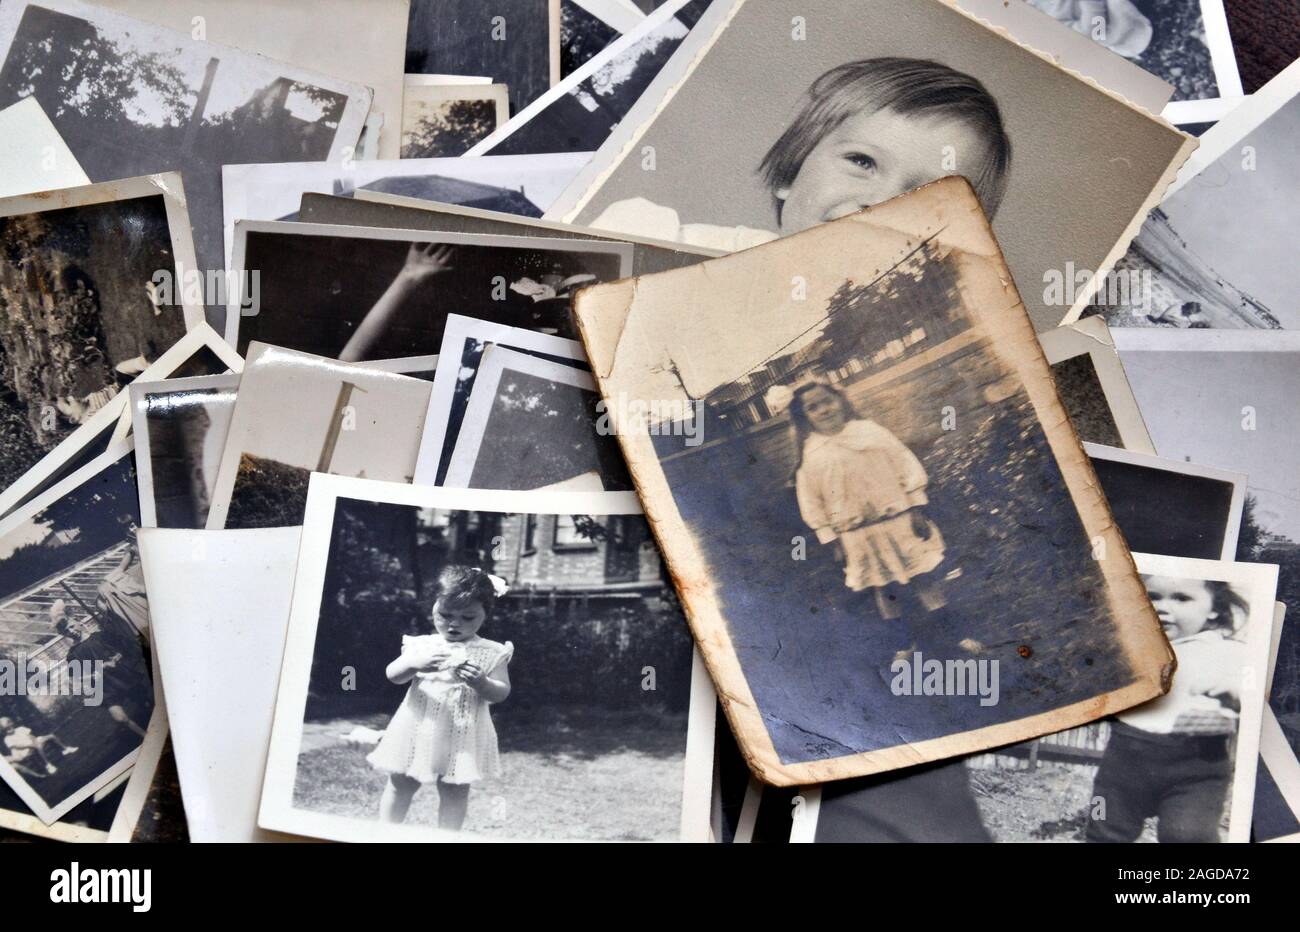 A collection of old, vintage black and white family photographic prints Stock Photo